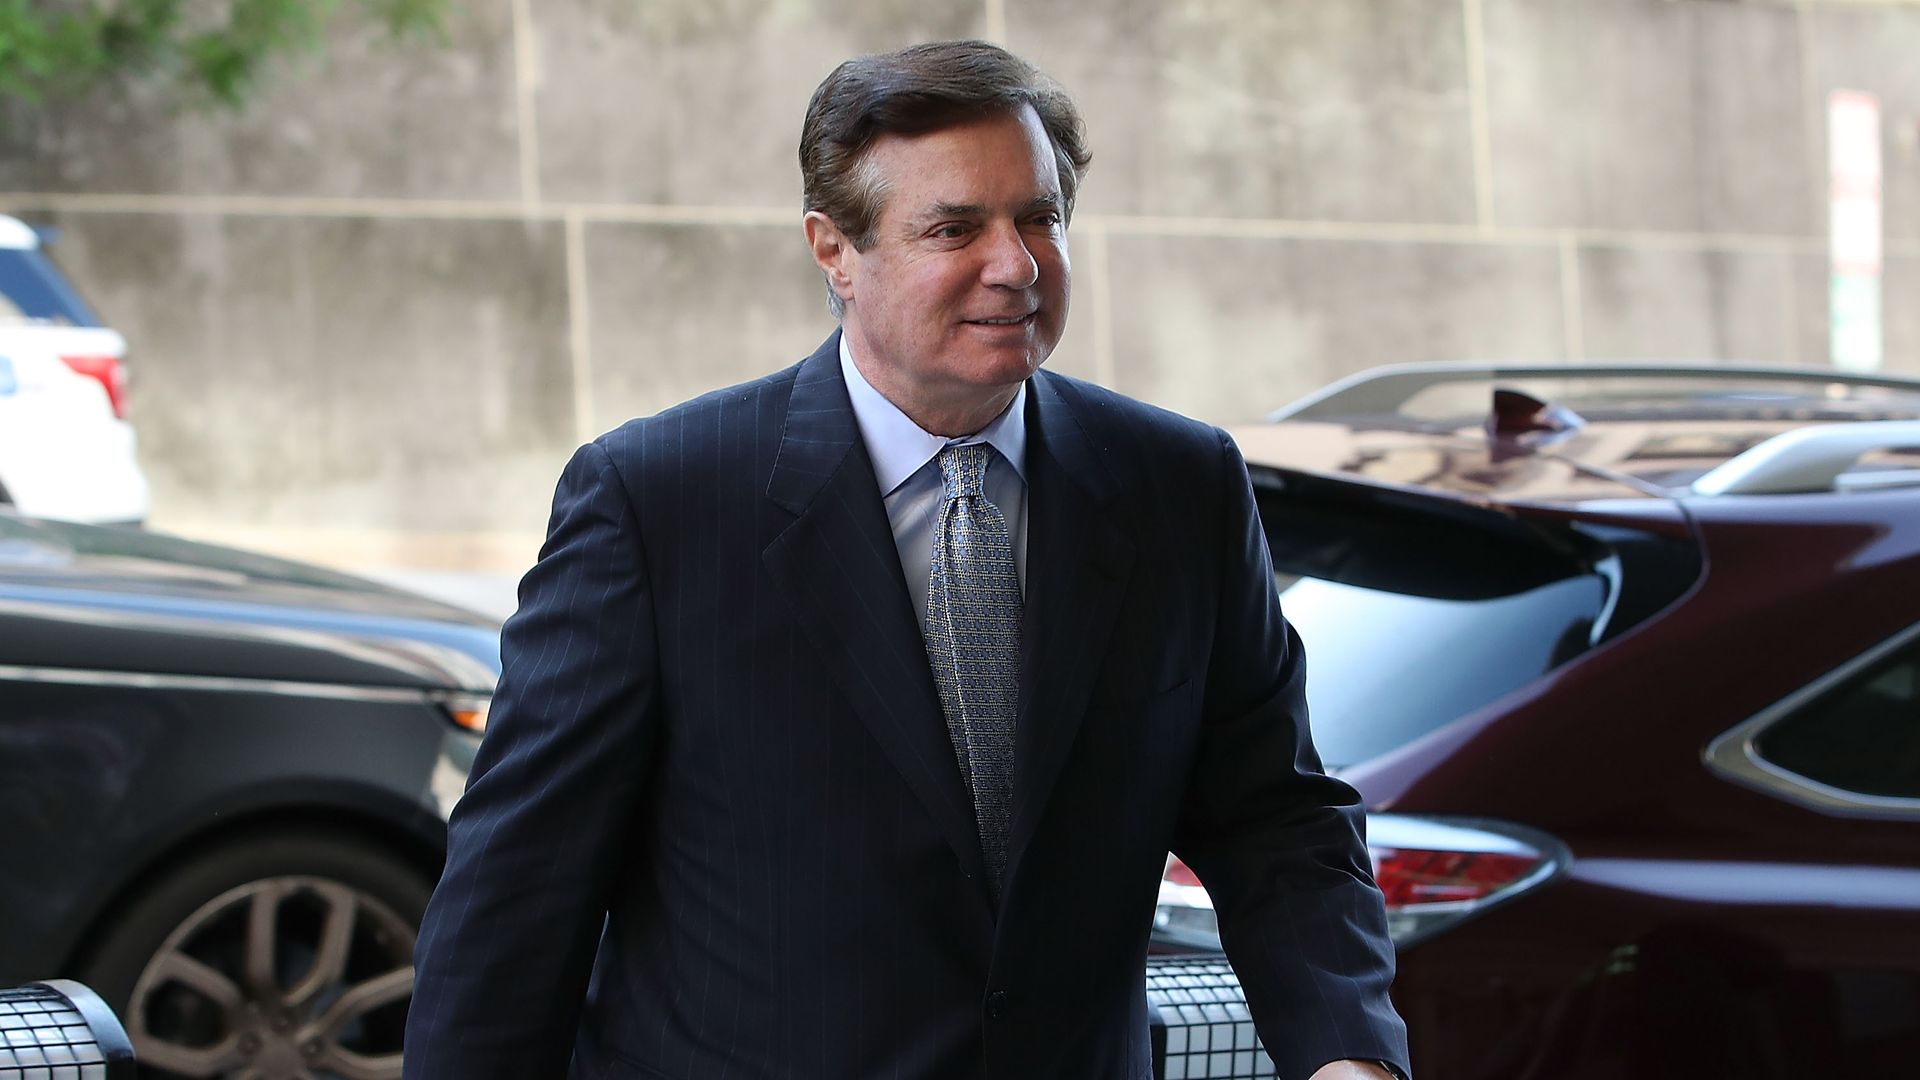 Former Trump campaign manager Paul Manafort. Photo: Mark Wilson/Getty Images